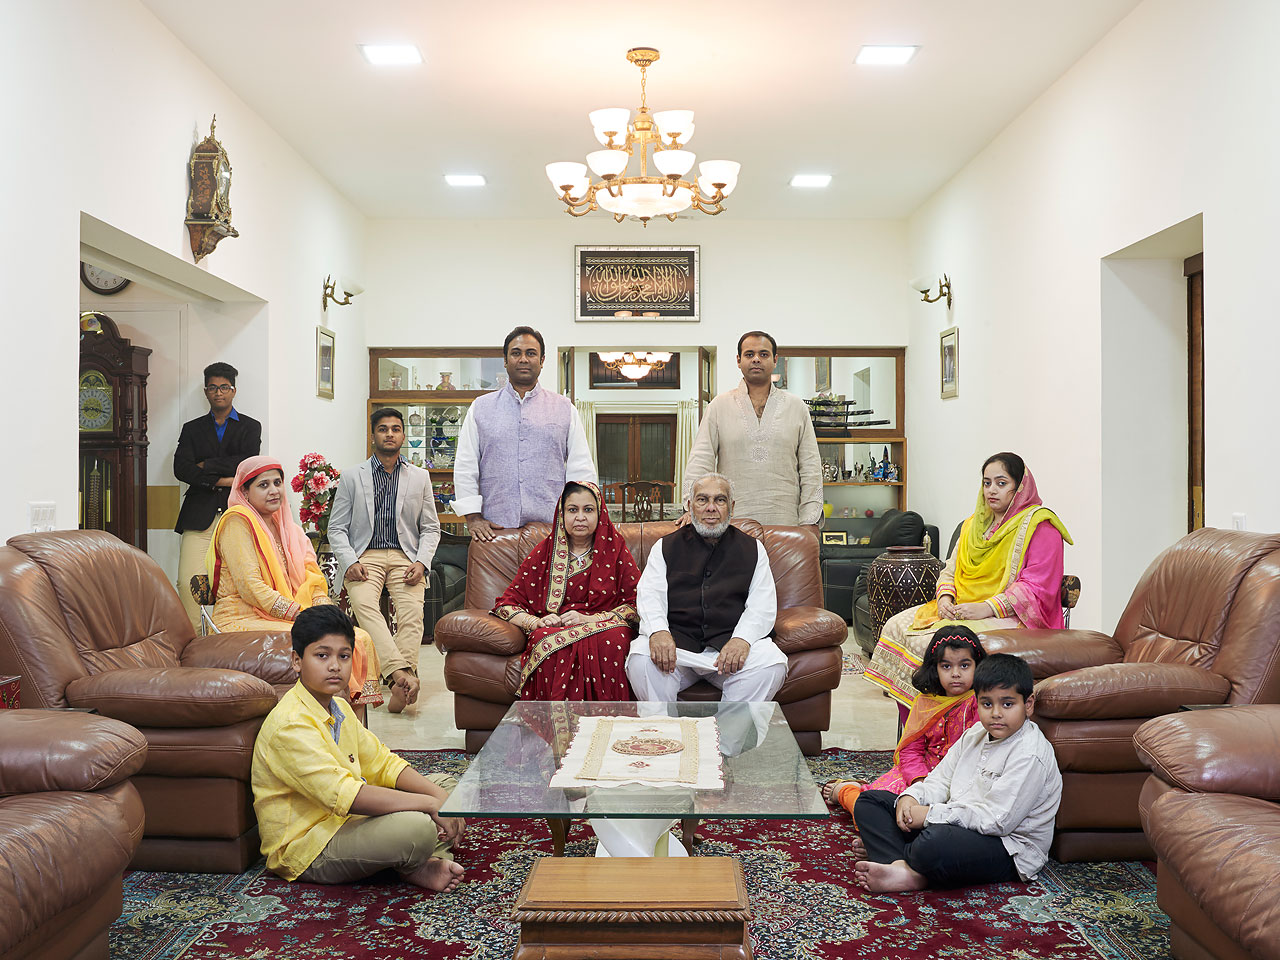 Nora Bibel - FAMILY COMES FIRST - Joint family portraits in Bangalore, India - Felix Schoeller Photoaward